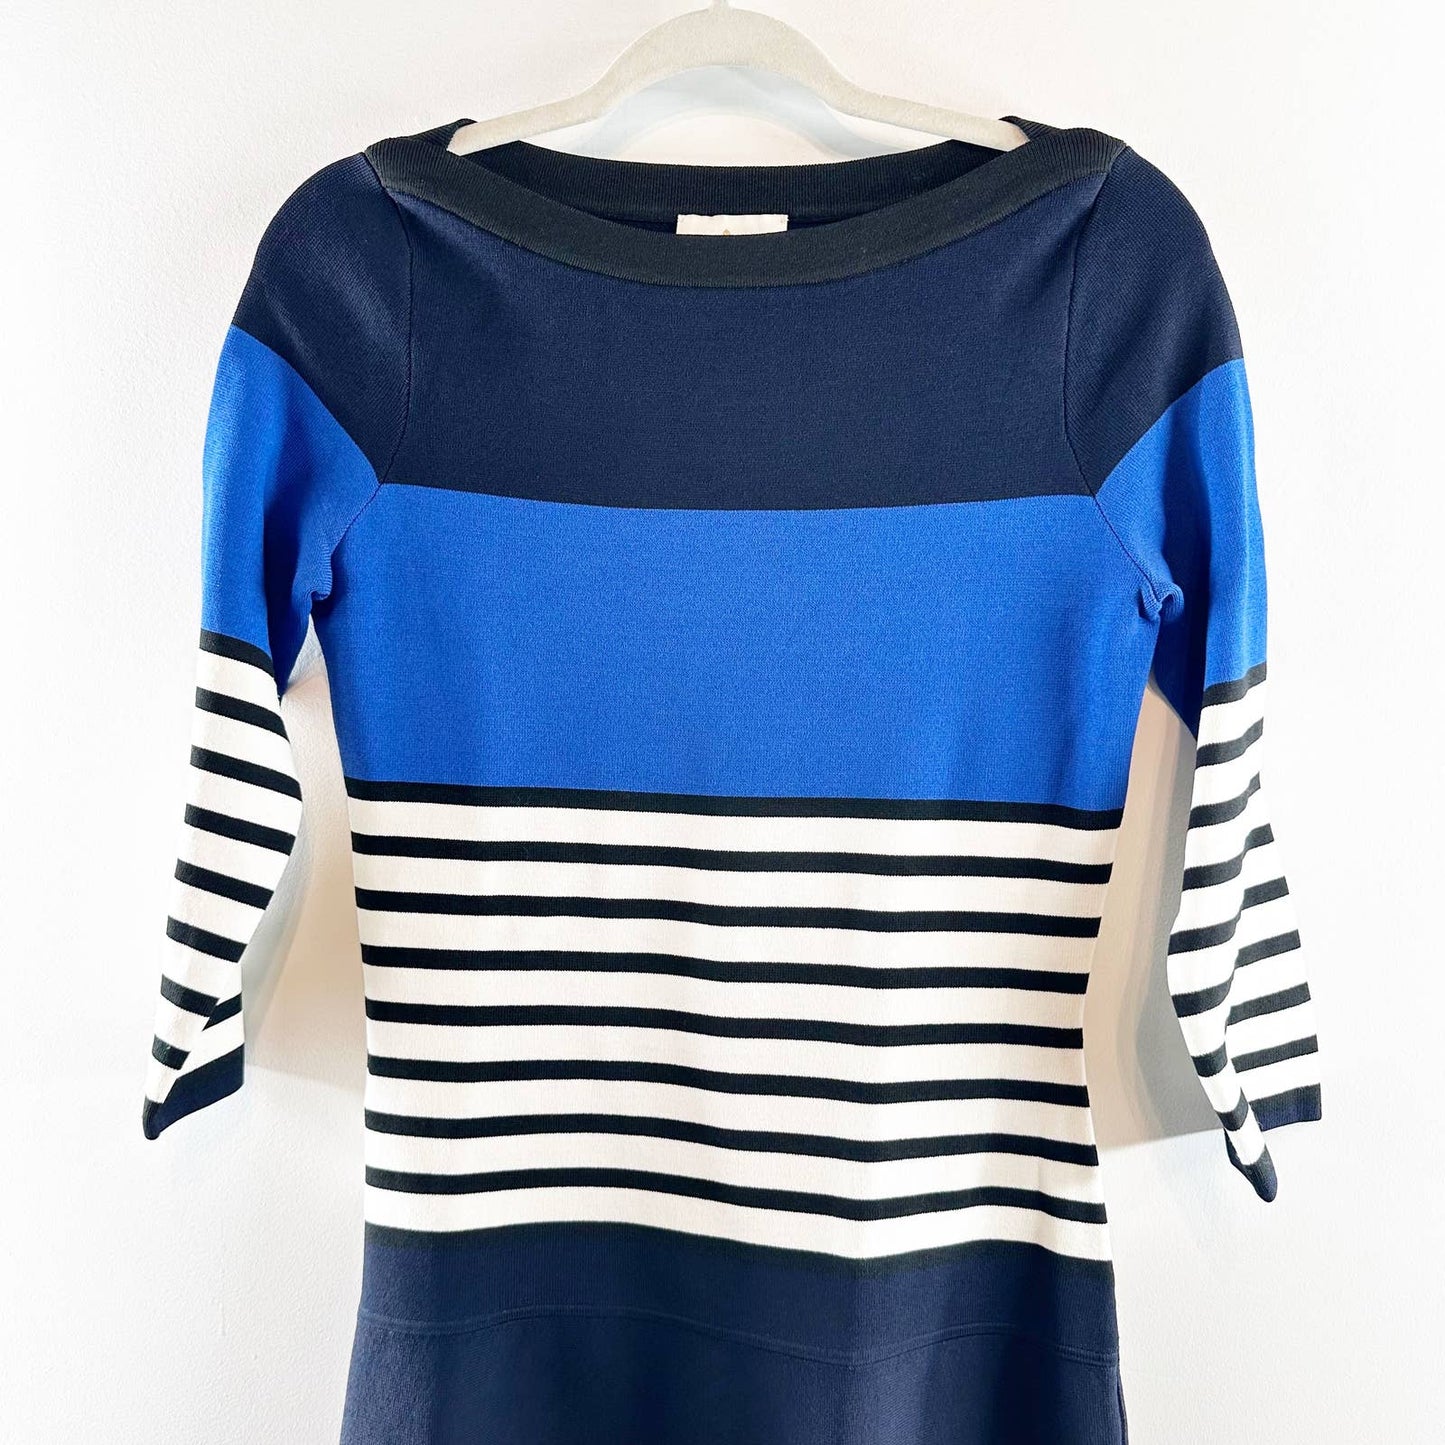 Kate Spade A Line Striped Sweater Dress Blue Colorblock Small